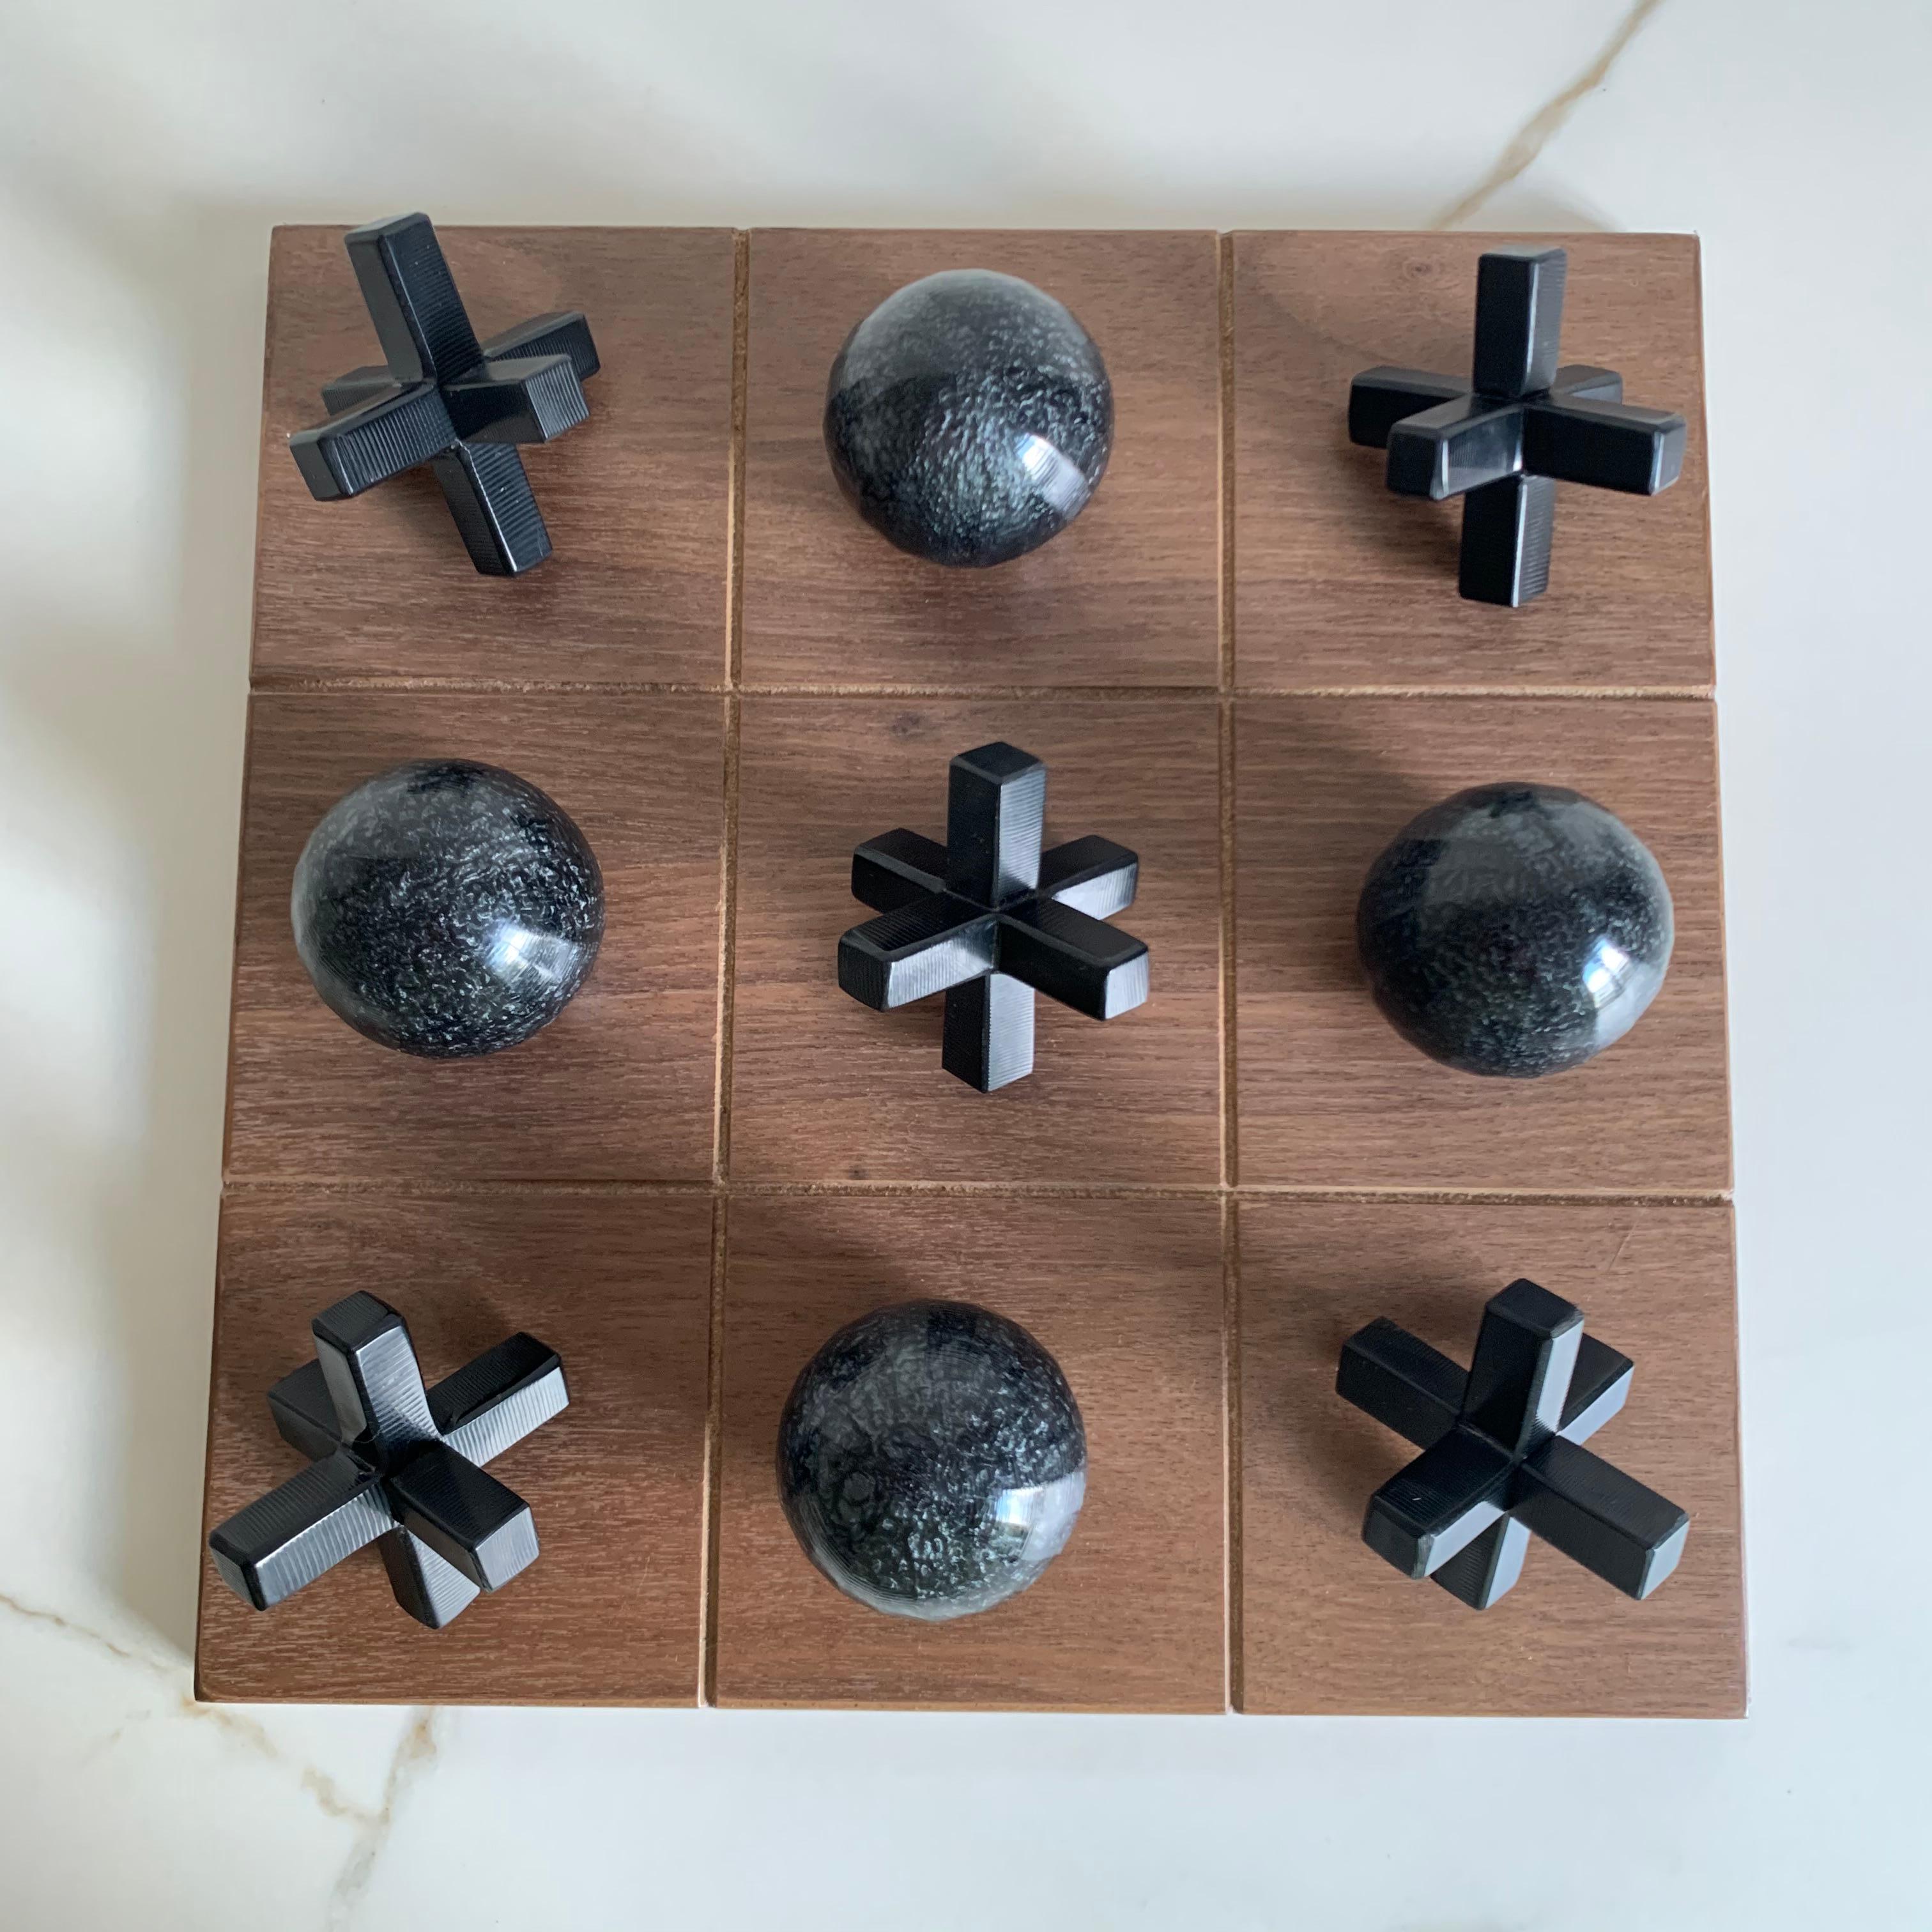 Our Tic Tac Toe is a beautiful, modern and fun take on the classic game. The three dimensional pieces are handmade in black pearl & black resin and the board is made of oak wood veneer. It will be the coolest statement piece on any coffee